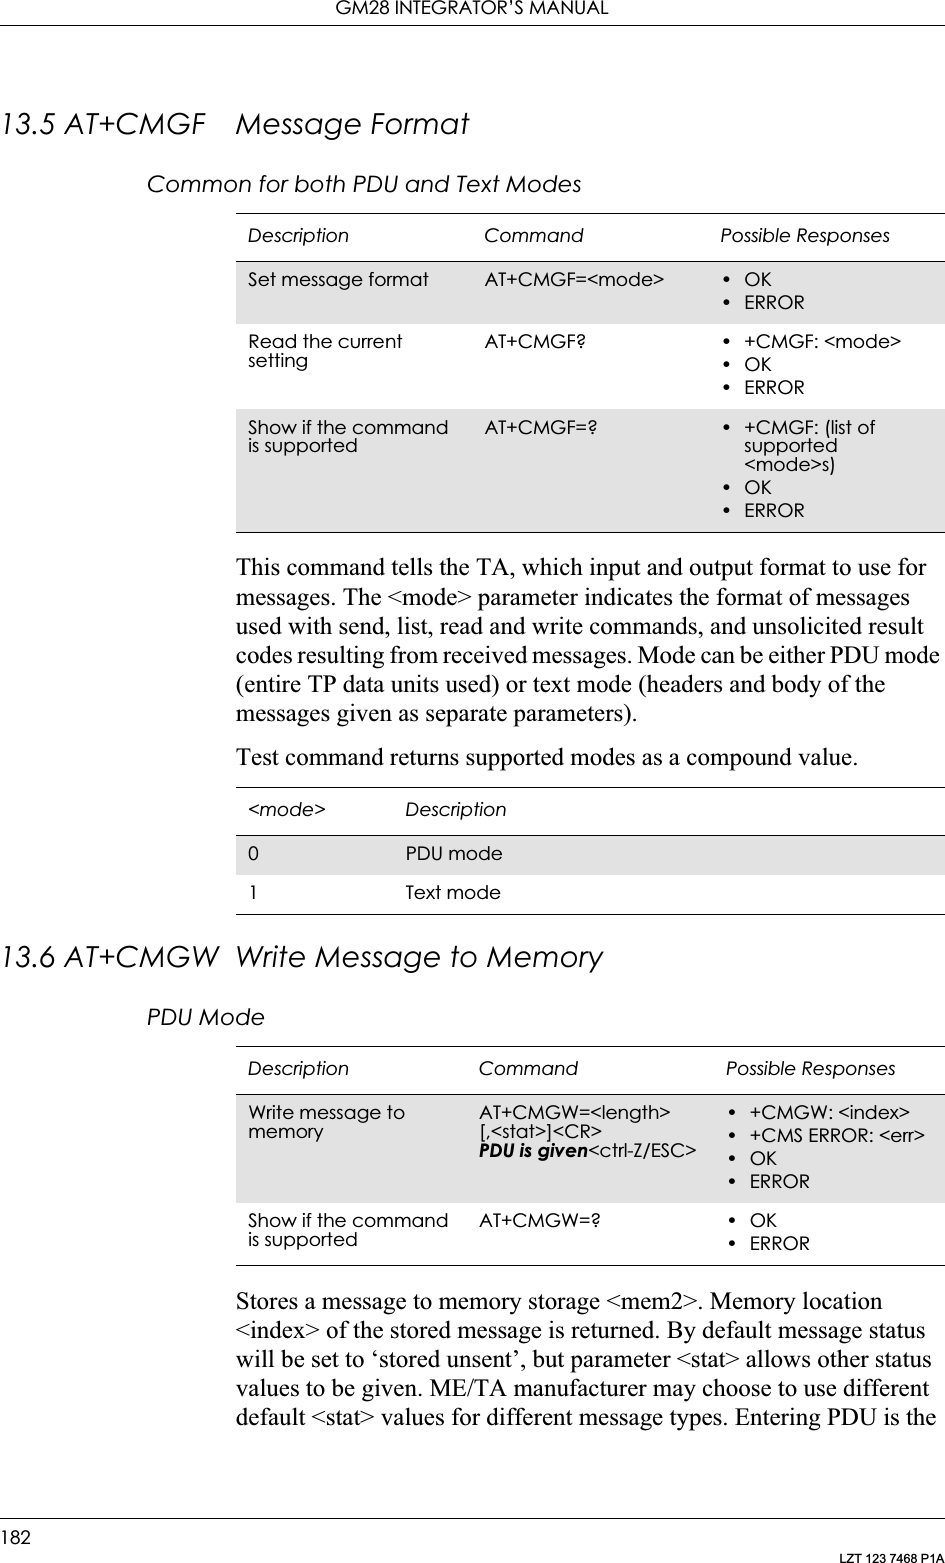 GM28 INTEGRATOR’S MANUAL182LZT 123 7468 P1A13.5 AT+CMGF Message FormatCommon for both PDU and Text ModesThis command tells the TA, which input and output format to use for messages. The &lt;mode&gt; parameter indicates the format of messages used with send, list, read and write commands, and unsolicited result codes resulting from received messages. Mode can be either PDU mode (entire TP data units used) or text mode (headers and body of the messages given as separate parameters).Test command returns supported modes as a compound value.13.6 AT+CMGW Write Message to MemoryPDU ModeStores a message to memory storage &lt;mem2&gt;. Memory location &lt;index&gt; of the stored message is returned. By default message status will be set to ‘stored unsent’, but parameter &lt;stat&gt; allows other status values to be given. ME/TA manufacturer may choose to use different default &lt;stat&gt; values for different message types. Entering PDU is the Description Command Possible ResponsesSet message format AT+CMGF=&lt;mode&gt; •OK•ERRORRead the current settingAT+CMGF? • +CMGF: &lt;mode&gt;•OK•ERRORShow if the command is supportedAT+CMGF=? • +CMGF: (list of supported &lt;mode&gt;s)•OK•ERROR&lt;mode&gt; Description0PDU mode1 Text modeDescription Command Possible ResponsesWrite message to memoryAT+CMGW=&lt;length&gt; [,&lt;stat&gt;]&lt;CR&gt;PDU is given&lt;ctrl-Z/ESC&gt;• +CMGW: &lt;index&gt;• +CMS ERROR: &lt;err&gt;•OK•ERRORShow if the command is supportedAT+CMGW=? • OK•ERROR